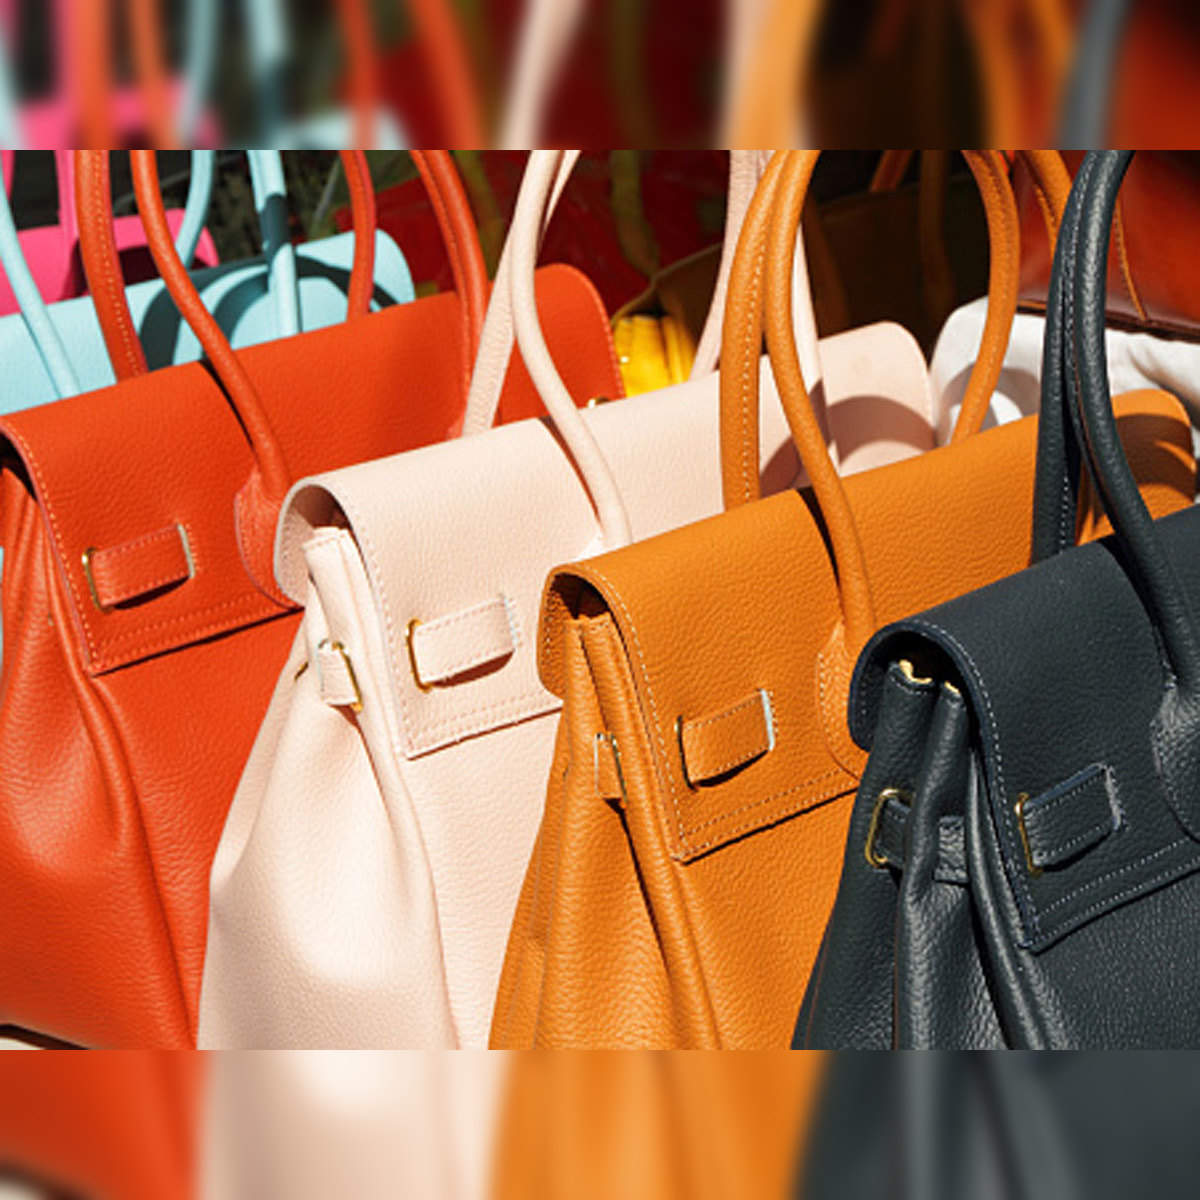 25 facts about the Longchamp Le Pliage bag that makes it so iconic today